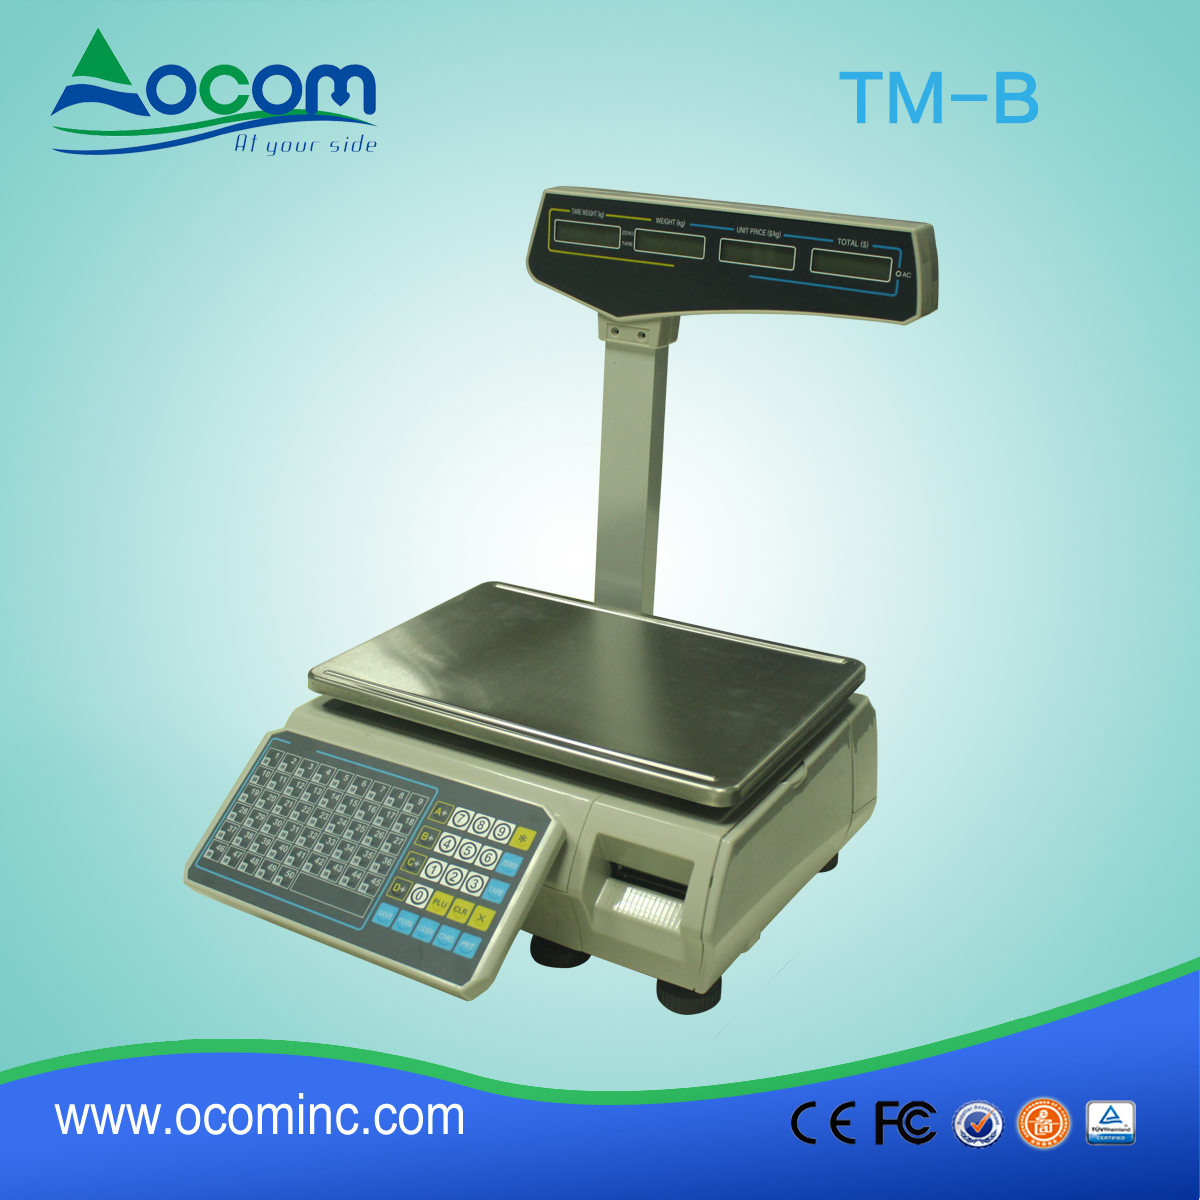 (TM-B) China made low cost thermal barcode printing scale